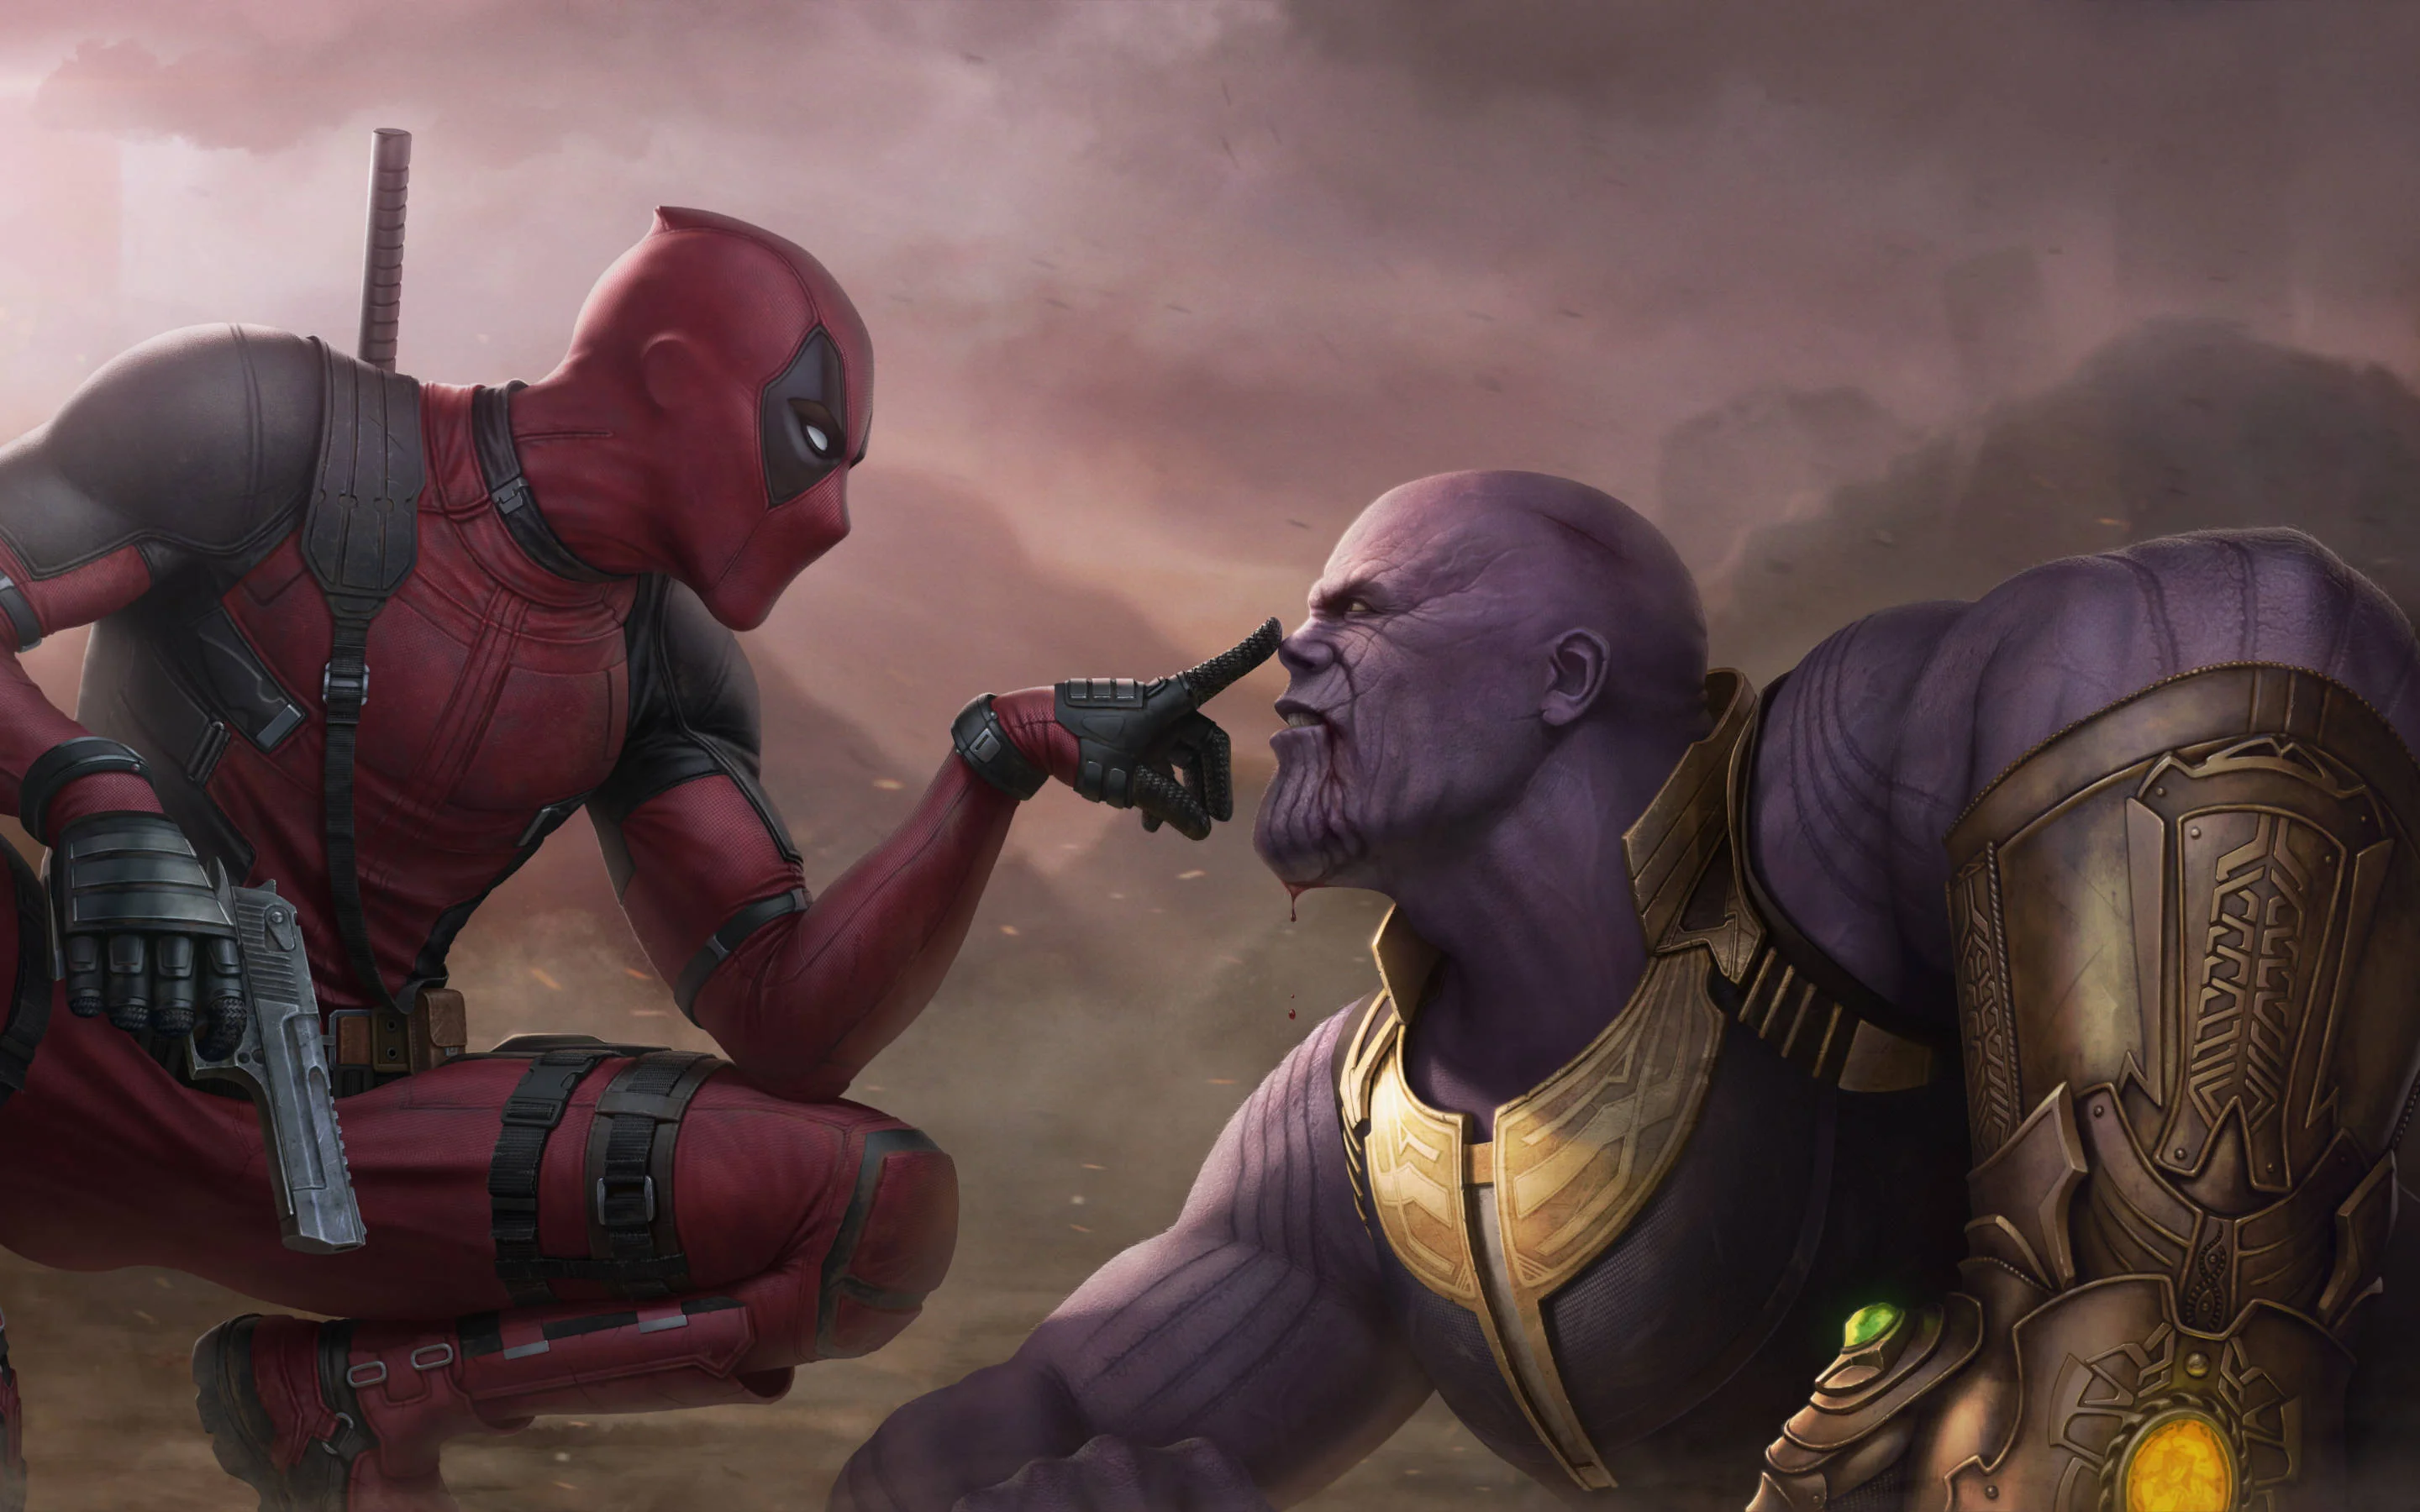 A mod has been released for Mortal Kombat 1 that adds Thanos and Deadpool